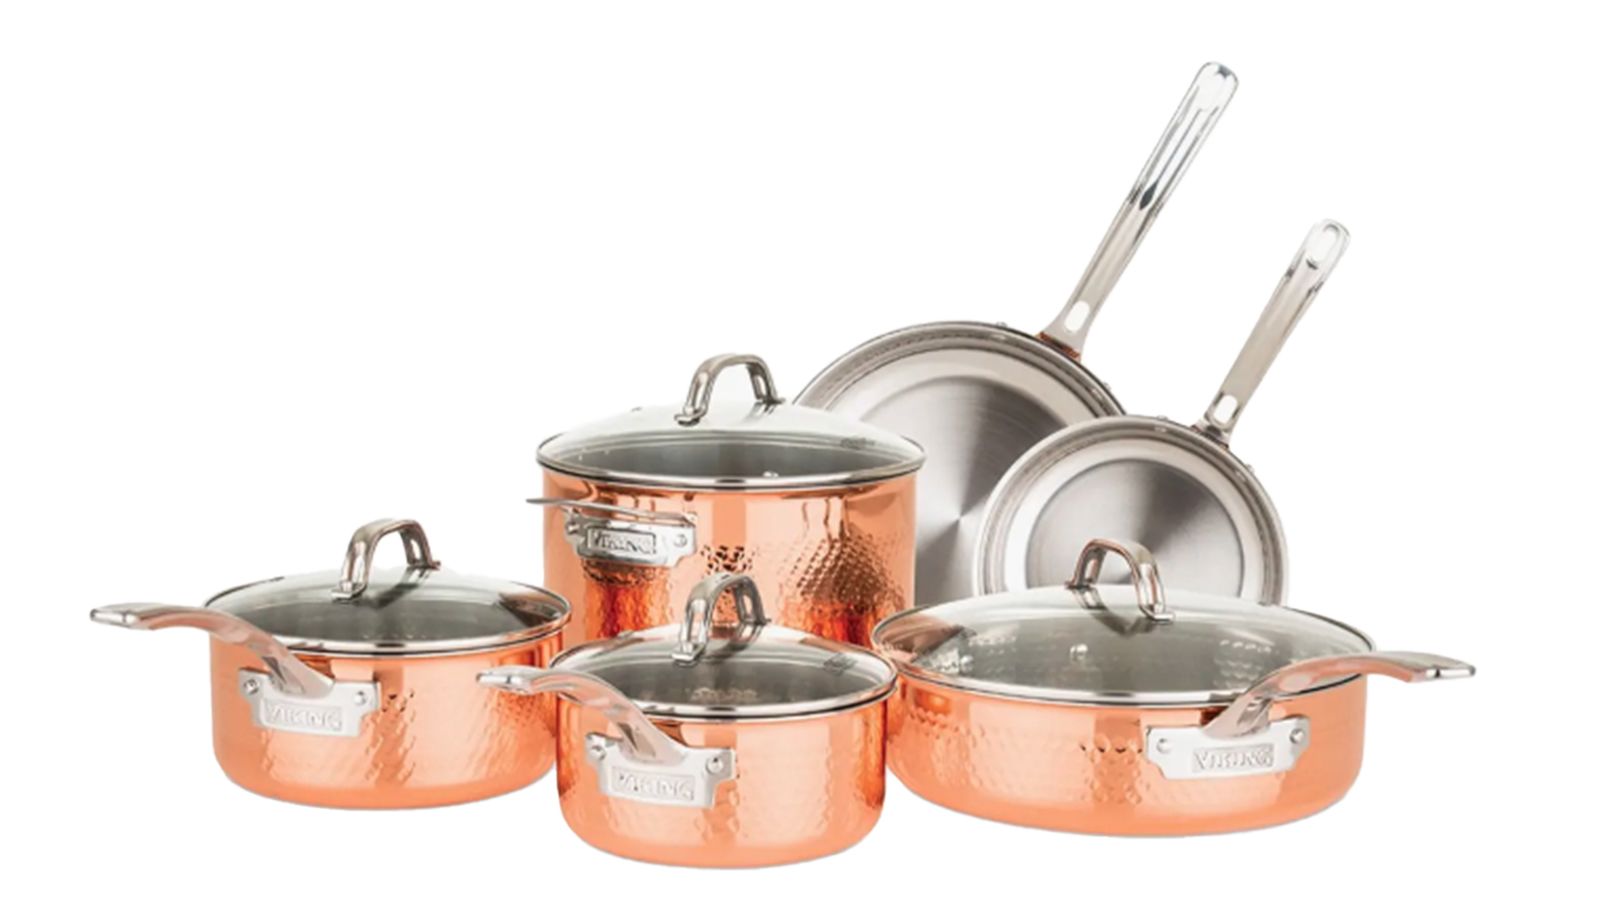 Has Slashed Tons of Prices on All-Clad Cookware for Prime Day-Including  a Saucepan for $115 Less